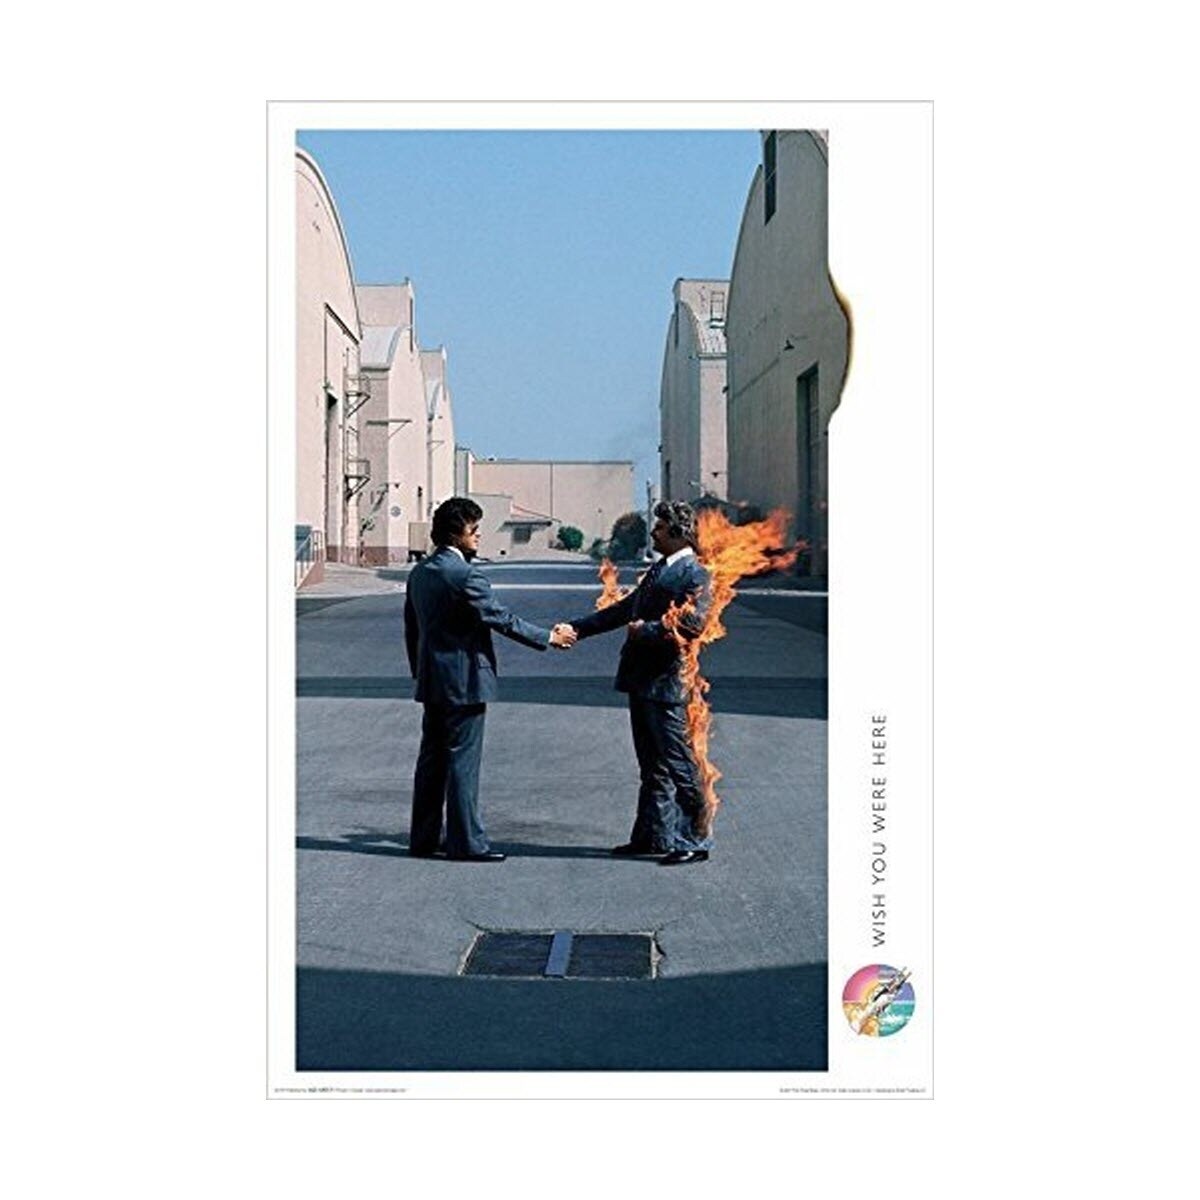 Pink Floyd Wish You Were Here Poster Overstock